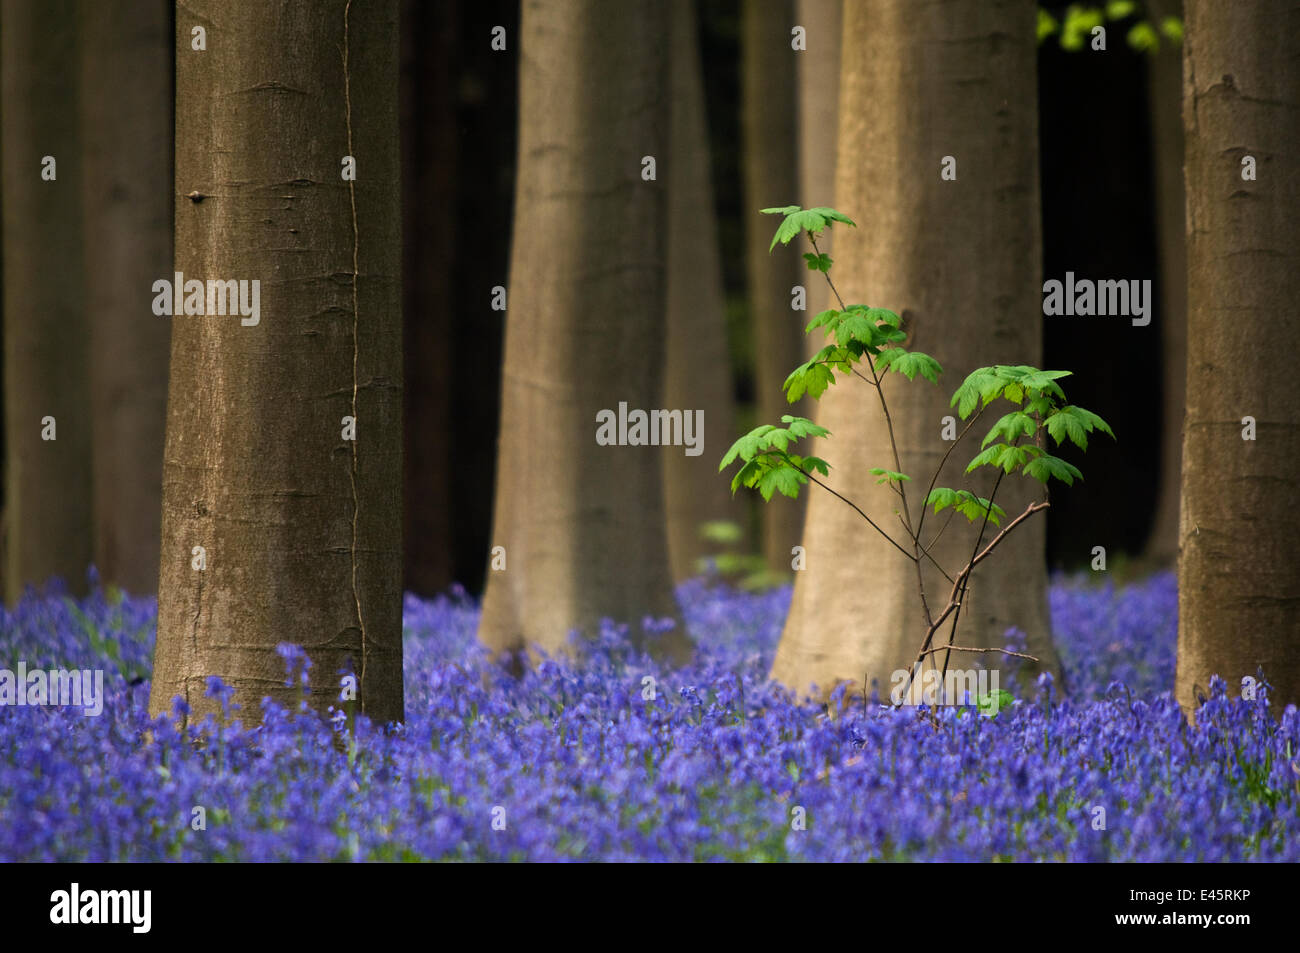 Deep blue carpet of Bluebells (Hyacinthoides non-scripta / Endymion scriptum) flowering in Beech wood with Sycamore sapling, Hallerbos, Belgium, April Stock Photo